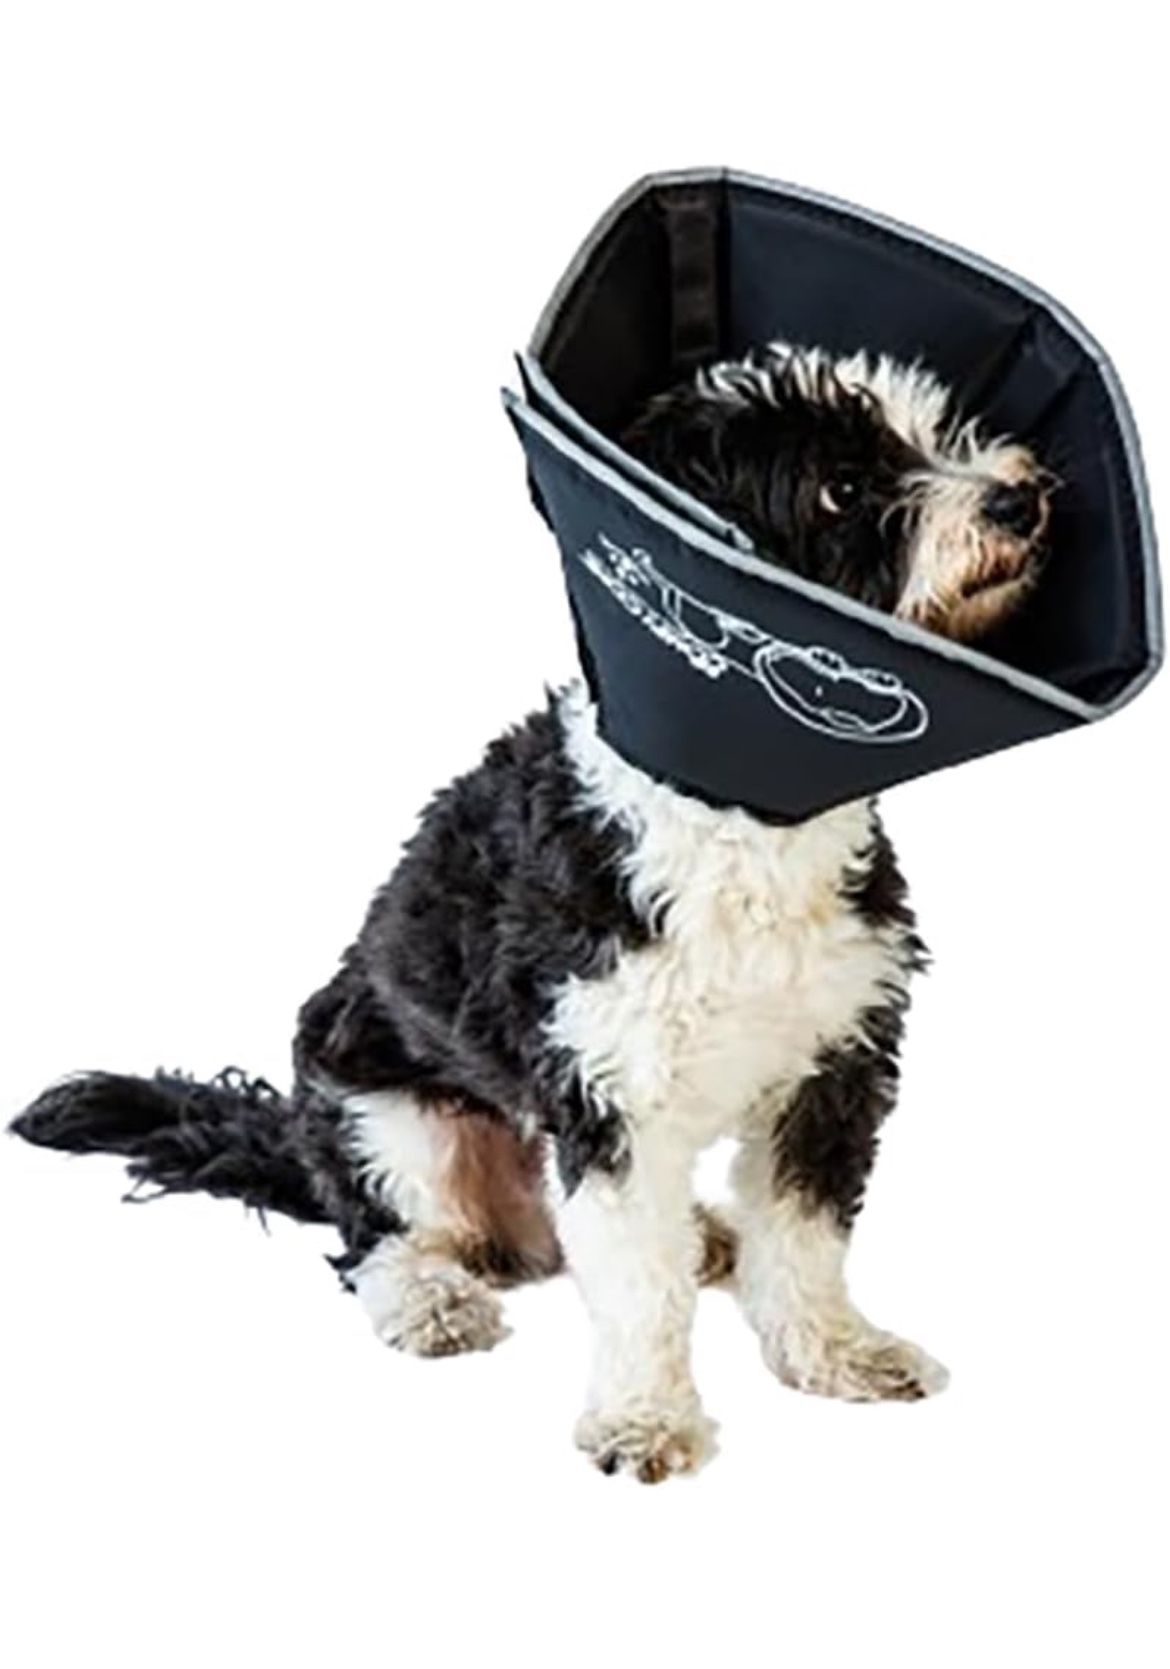 Brand New Black X-Large Comfy Cone Pet Cone for Dogs, Cats, Black - Comfortable Soft Dog Cone Collar Recovery Collar